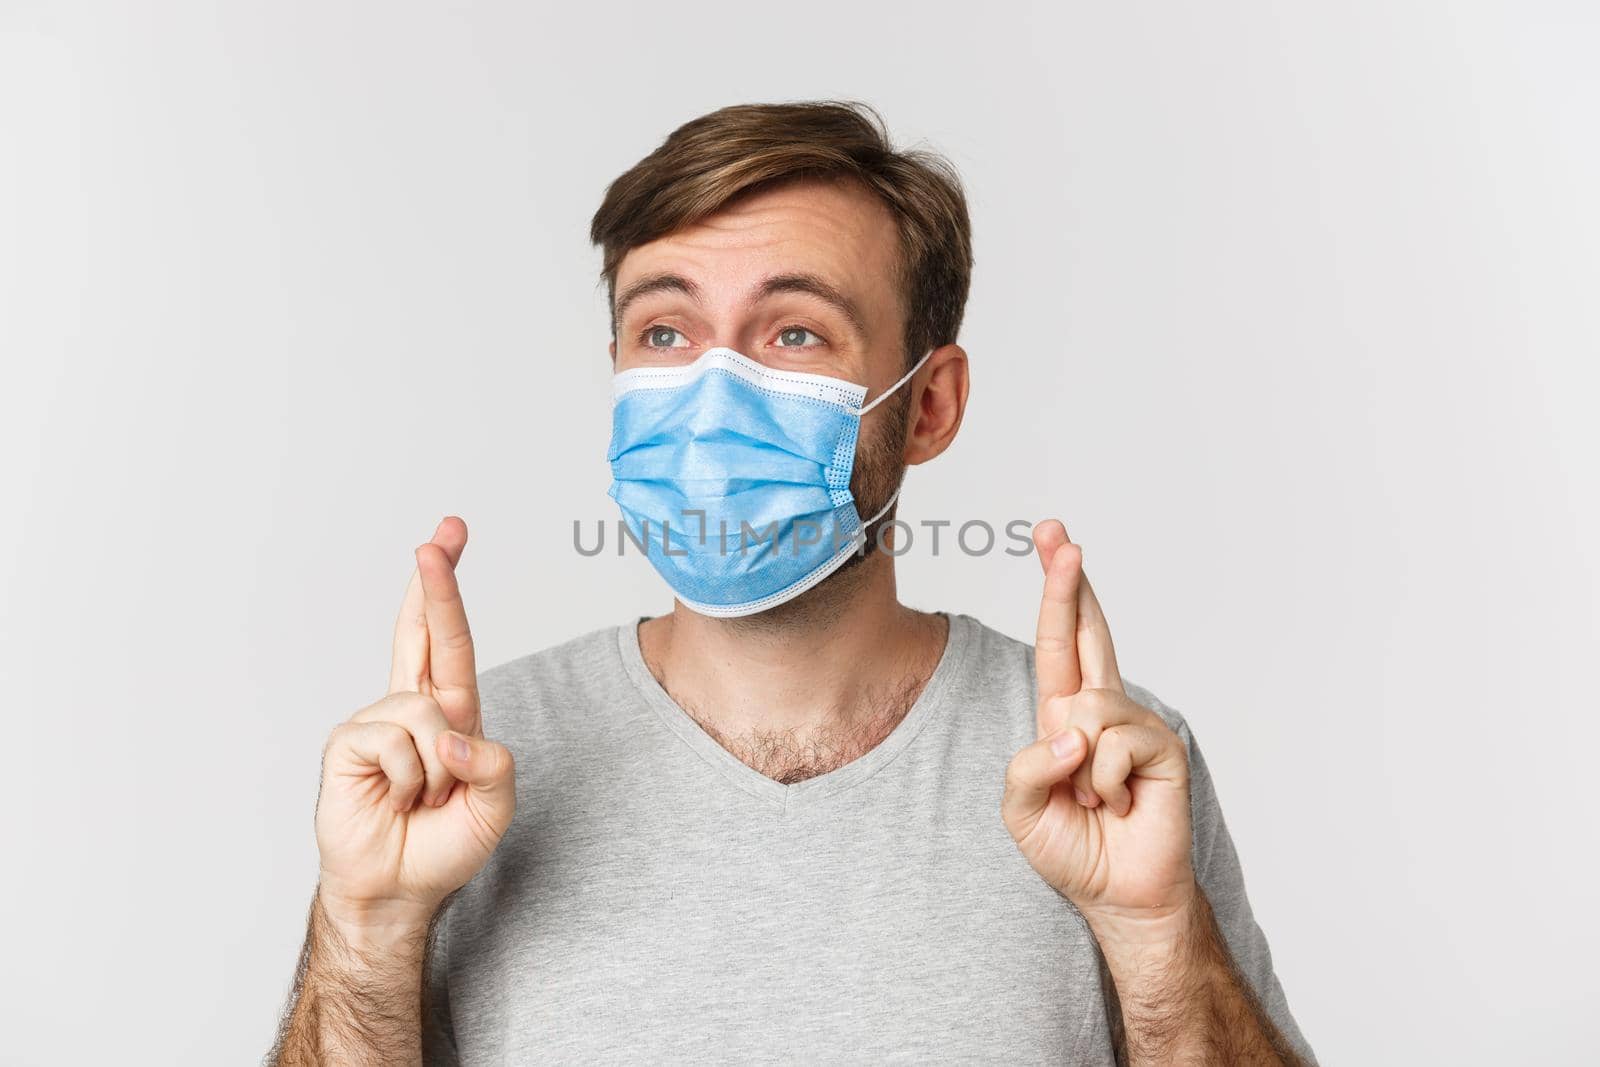 Concept of pandemic, covid-19 and social-distancing. Hopeful worried guy in medical mask, cross fingers for good luck and making wish, looking left, standing over white background.